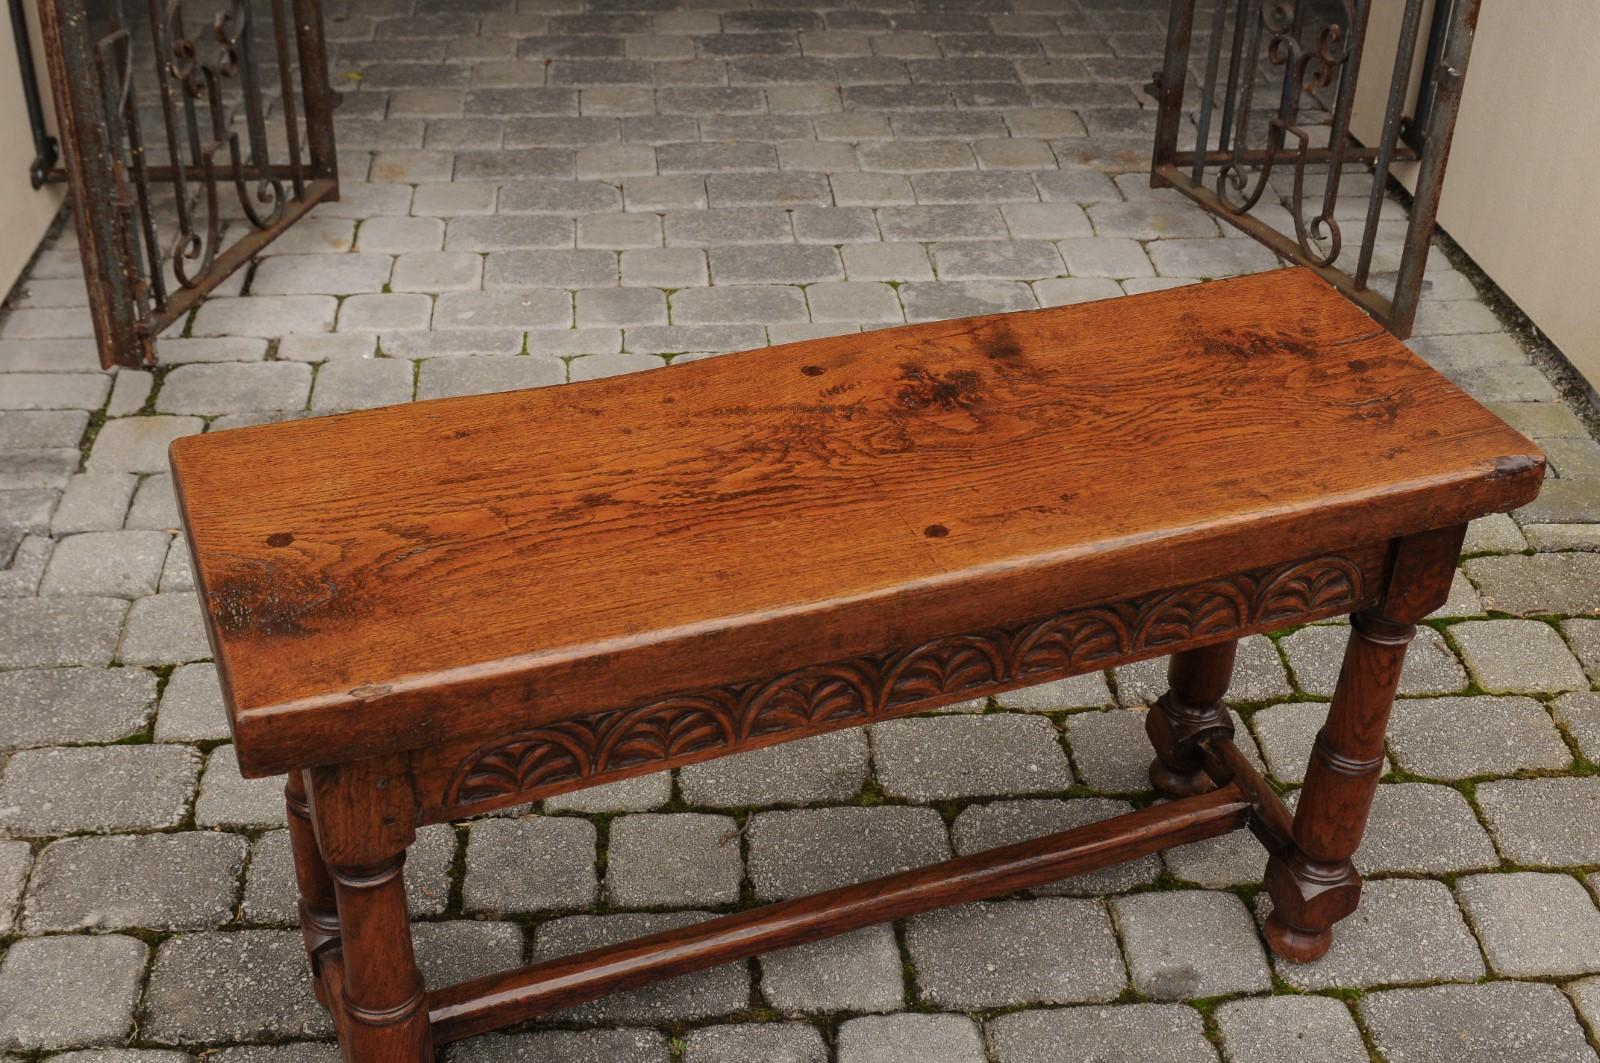 English Oak 1880s Bench with Low-Relief Carved Decor and Column-Shaped Legs For Sale 3